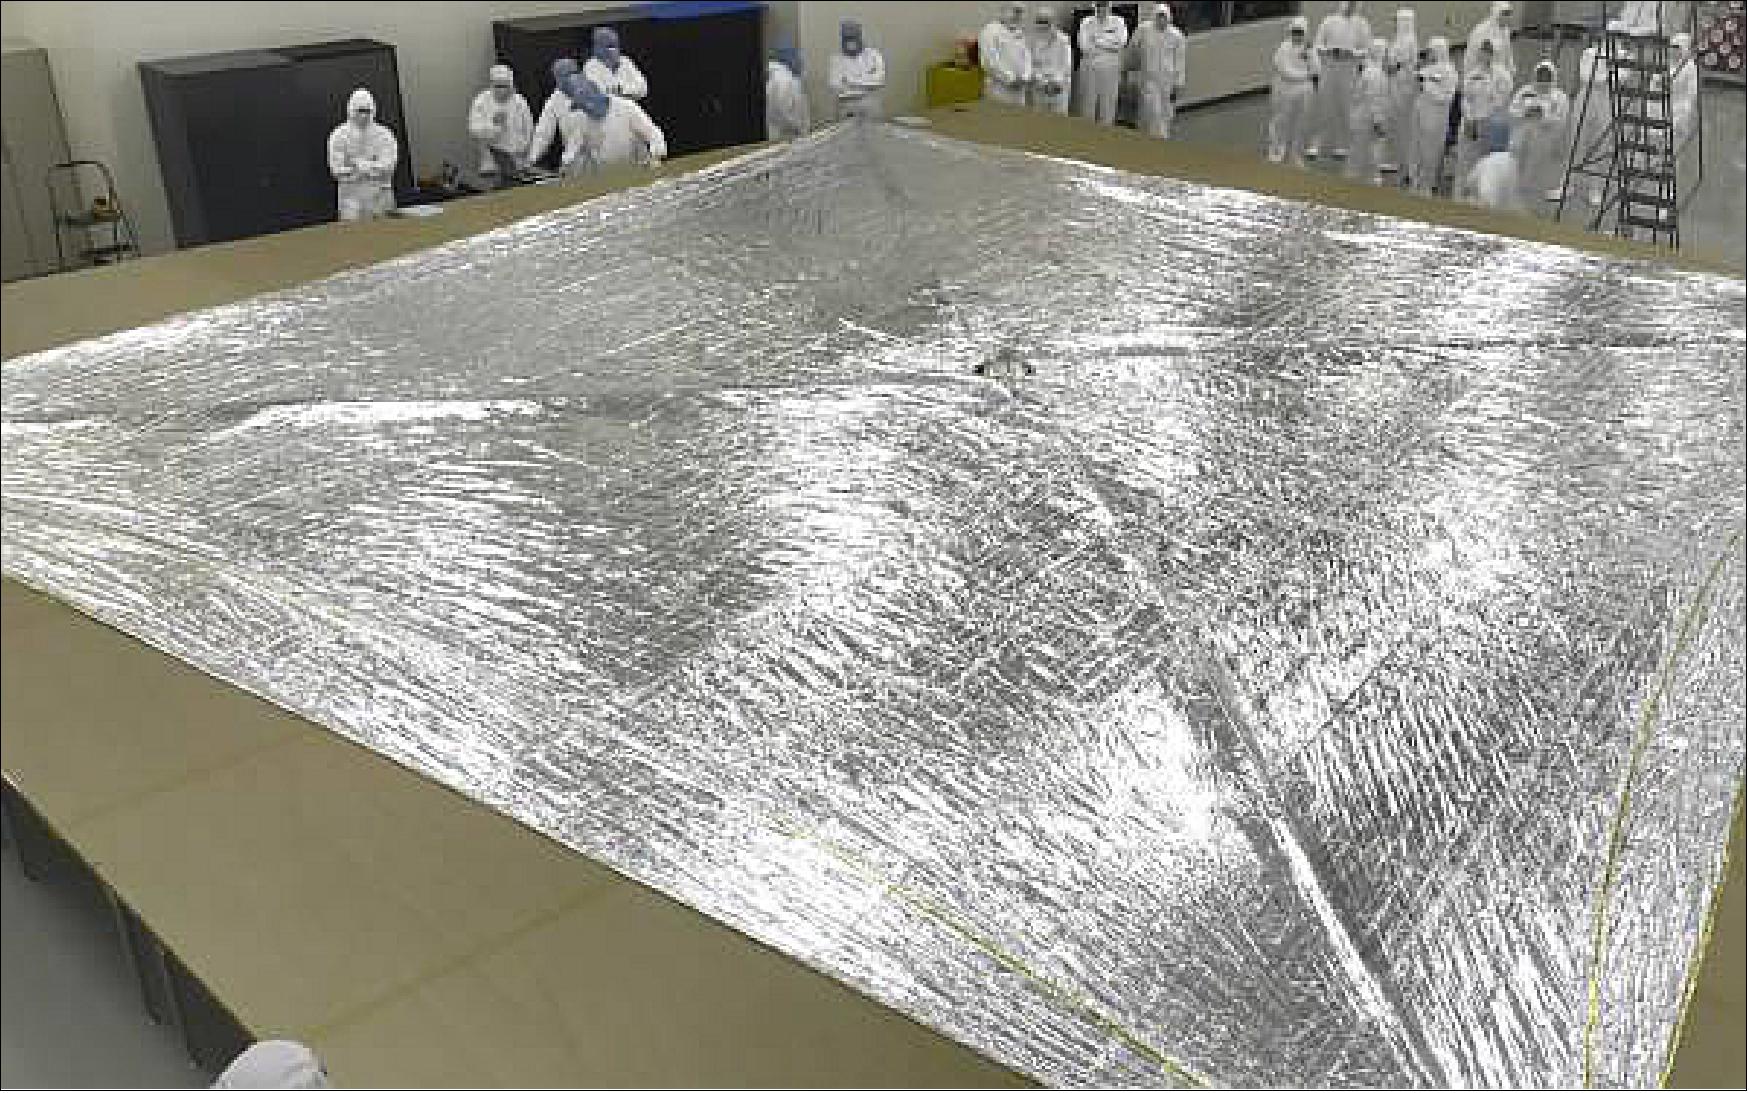 Figure 9: The fully-deployed NEA Scout solar sail undergoing its final pre-flight checkout (image credit: NASA, NEA Scout Team)